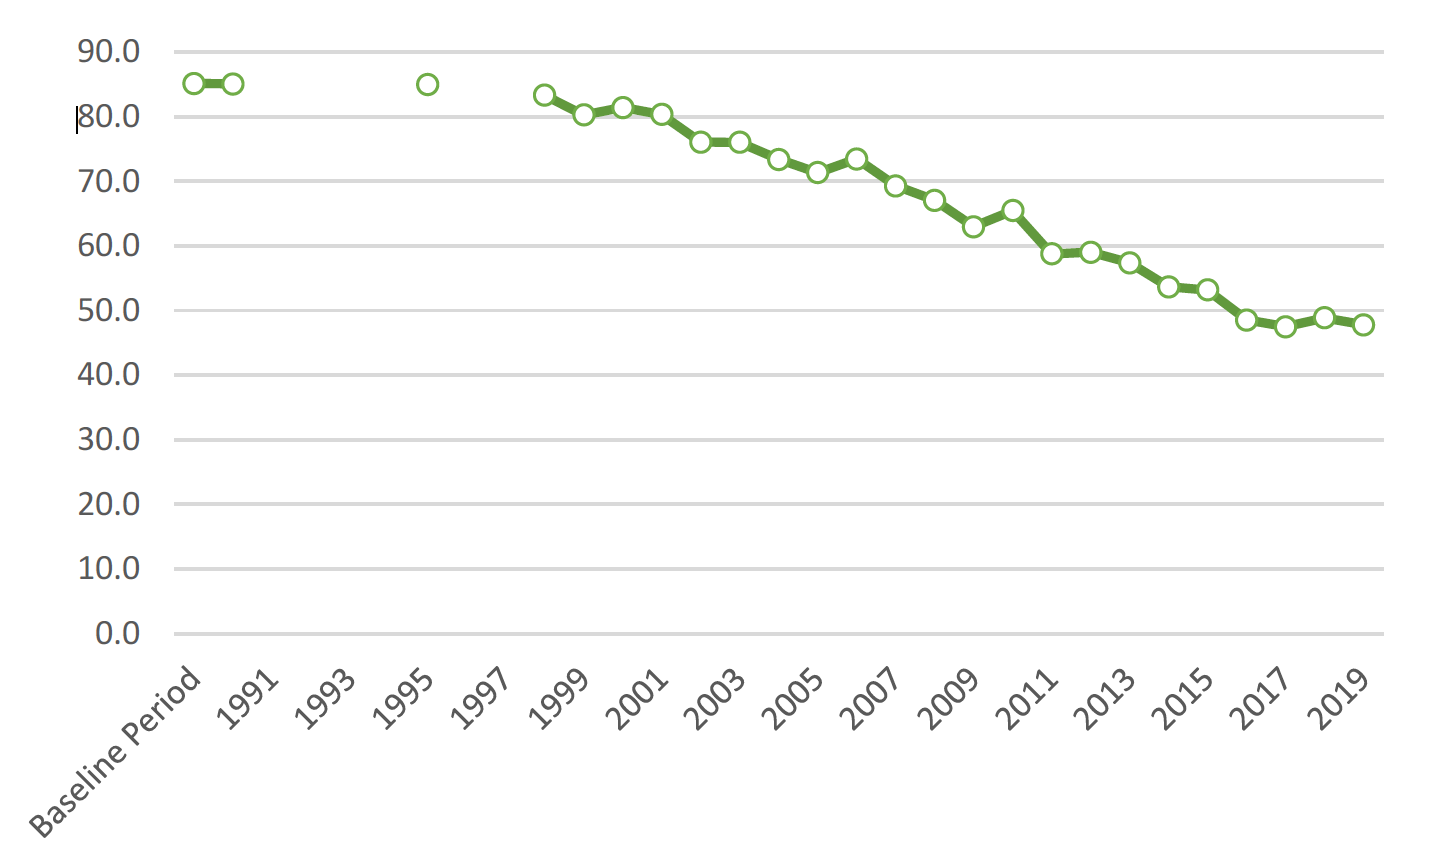 Time series of net greenhouse gas emissions, 1990-2019.